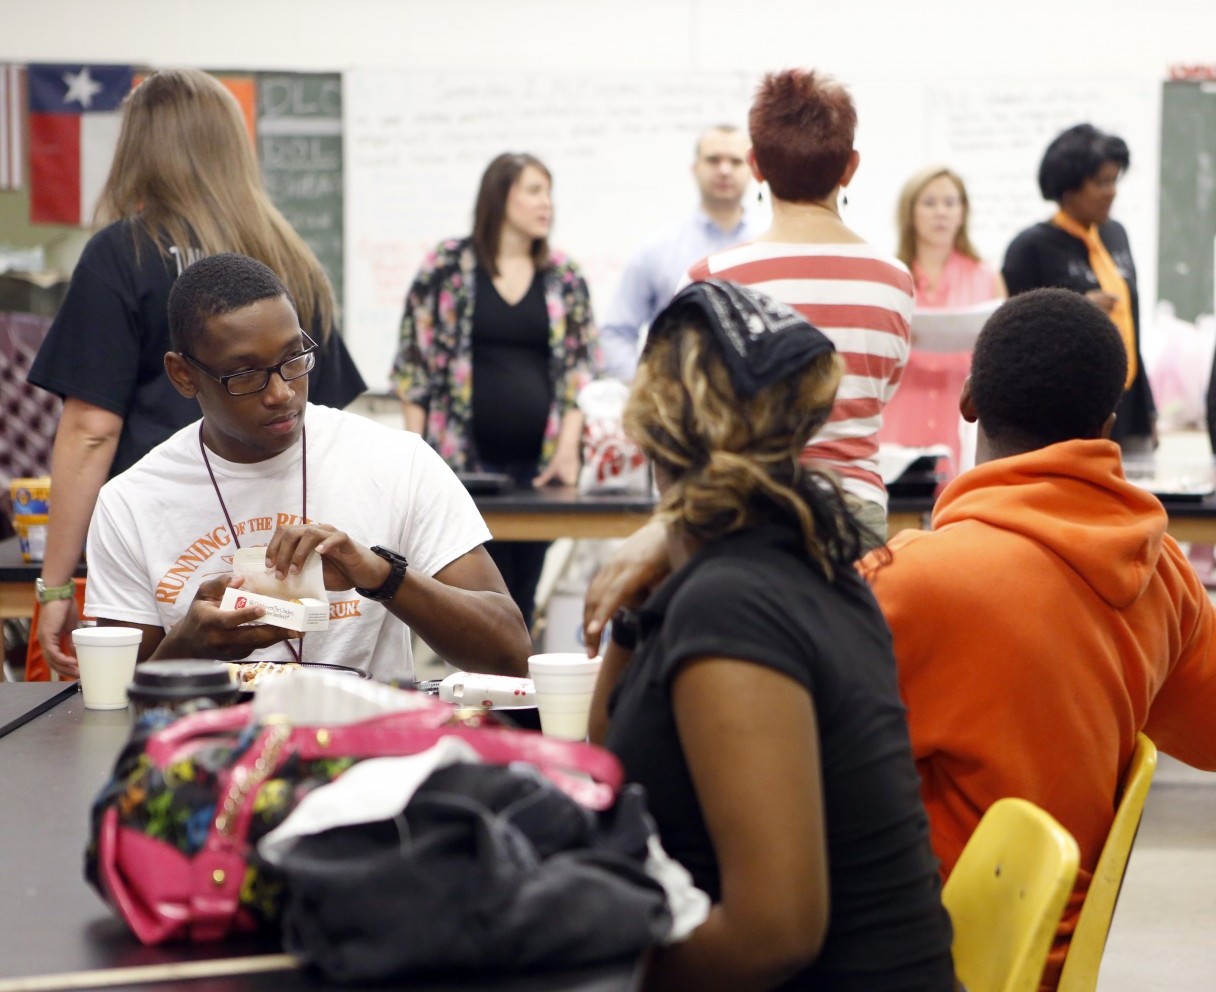 Desmond Davis, far left, and other students considered homeless or transitional, eat food provided to them by volunteers from the Church of the Incarnation at drop-in center at North Dallas High School. Photo/Lara Solt